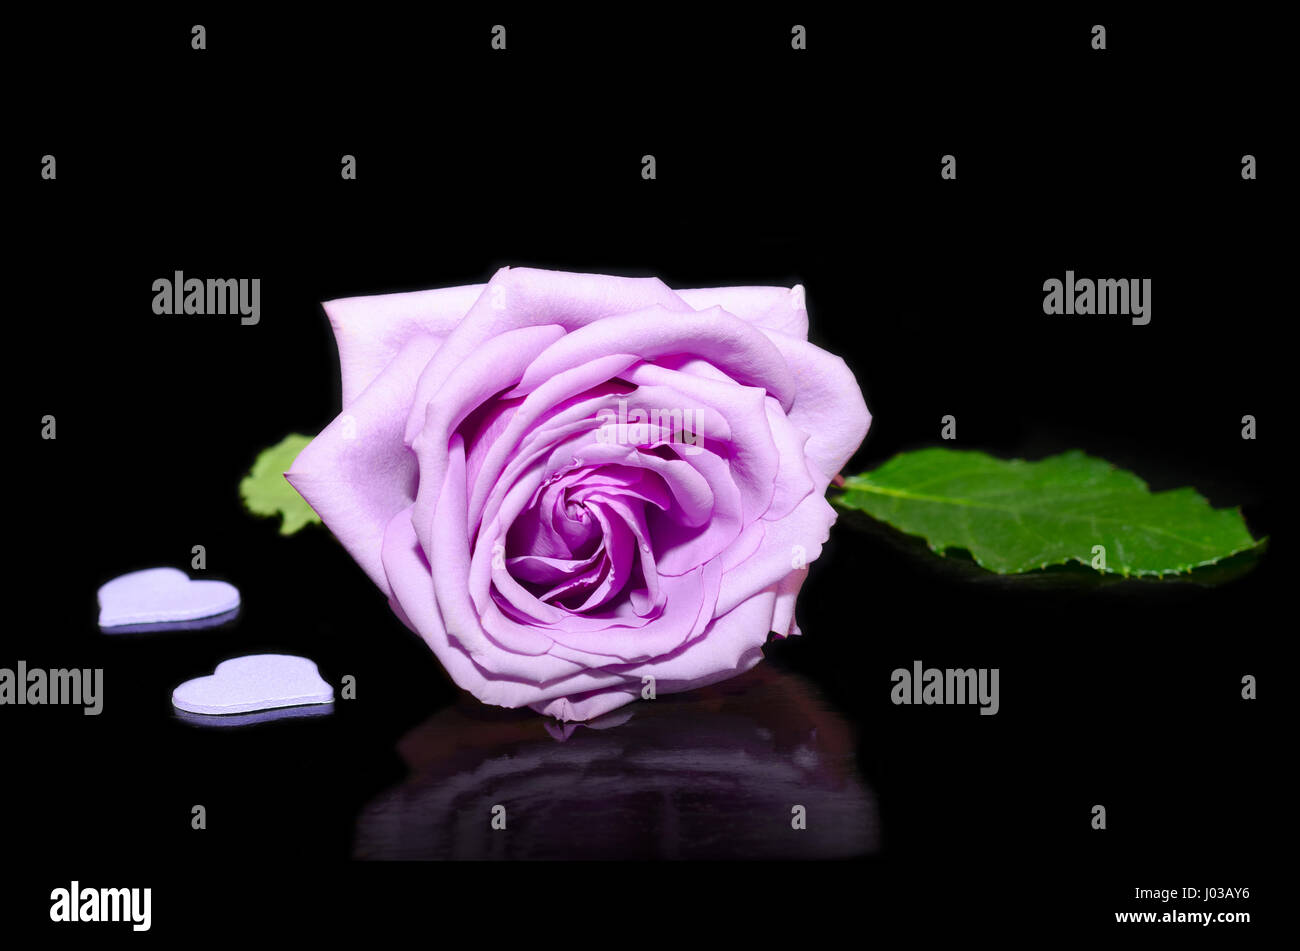 Purple Rose on a black background with reflection Stock Photo